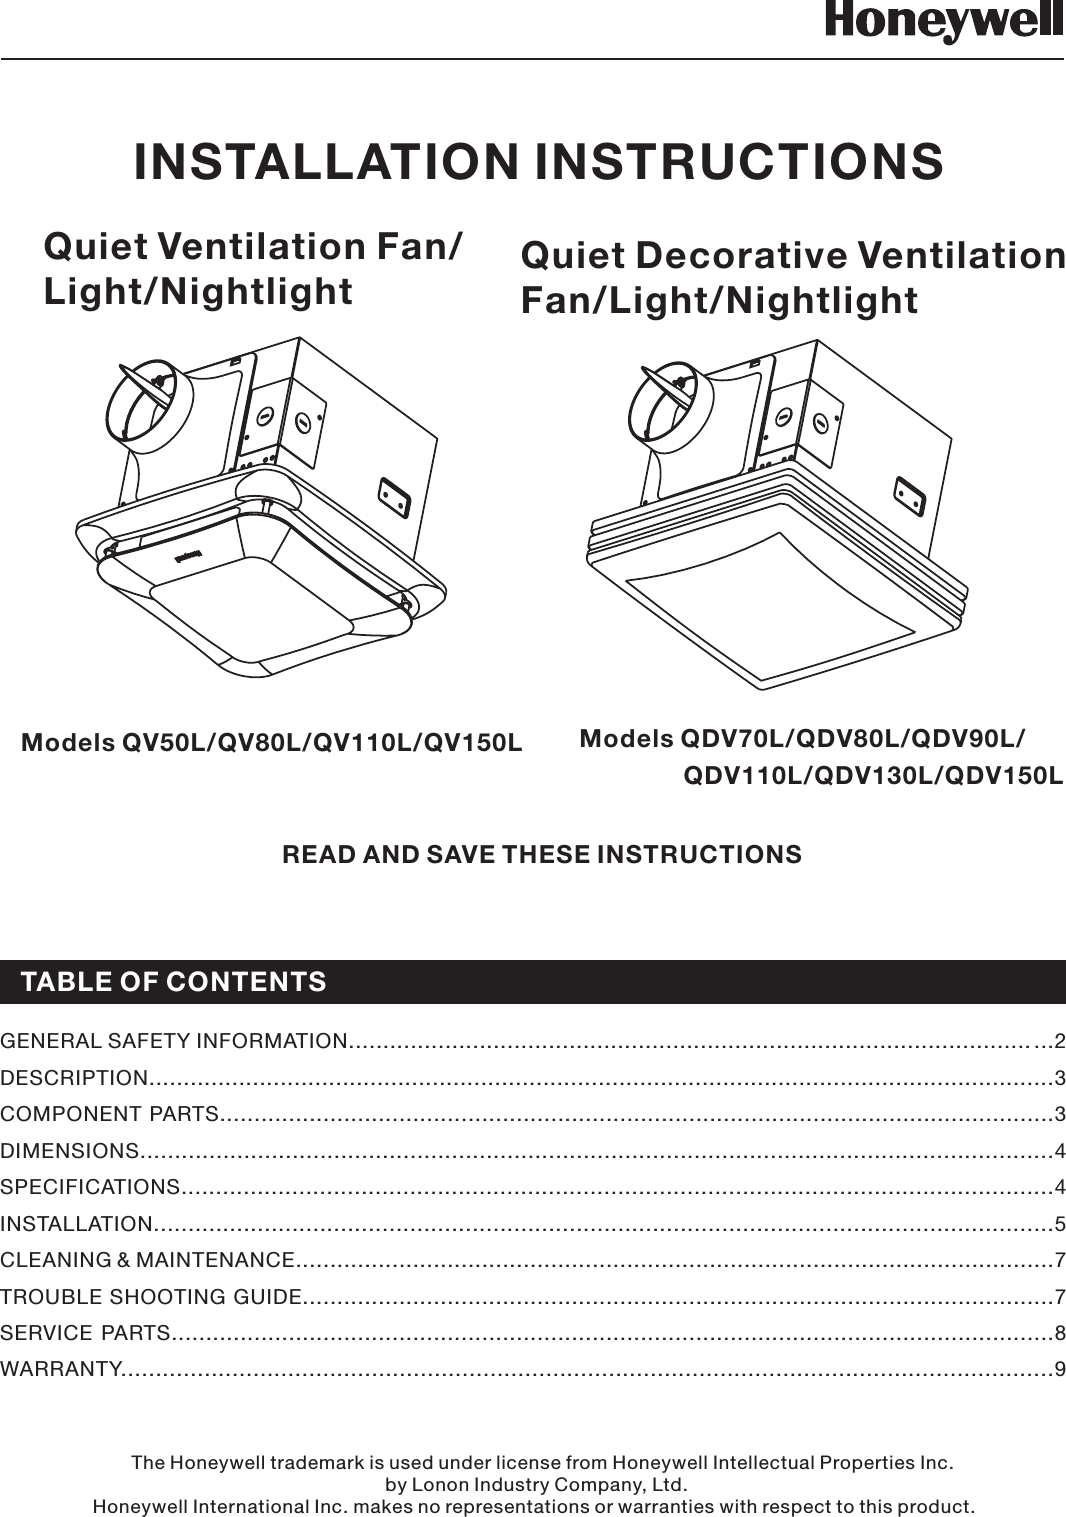 Quiet Ventilation Fan/Light/NightlightREAD AND SAVE THESE INSTRUCTIONSGENERAL SAFETY INFORMATION................................................ ................. ..........2......... ..................DESCRIPTION...................................................................................................................................3COMPONENT PARTS.........................................................................................................................3DIMENSIONS....................................................................................................................................4SPECIFICATIONS..............................................................................................................................4INSTALLATION..................................................................................................................................5CLEANING &amp; MAINTENANCE..............................................................................................................7TROUBLE SHOOTING GUIDE.............................................................................................................7SERVICE PARTS................................................................................................................................8WARRANTY......................................................................................................................................9Models QV50L/QV80L/QV110L/QV150LINSTALLATION INSTRUCTIONSThe Honeywell trademark is used under license from Honeywell Intellectual Properties Inc.by Lonon Industry Company, Ltd.Honeywell International Inc. makes no representations or warranties with respect to this product.TABLE OF CONTENTSQuiet Decorative VentilationFan/Light/NightlightModels QDV70L/QDV80L/QDV90L/QDV110L/QDV130L/QDV150L